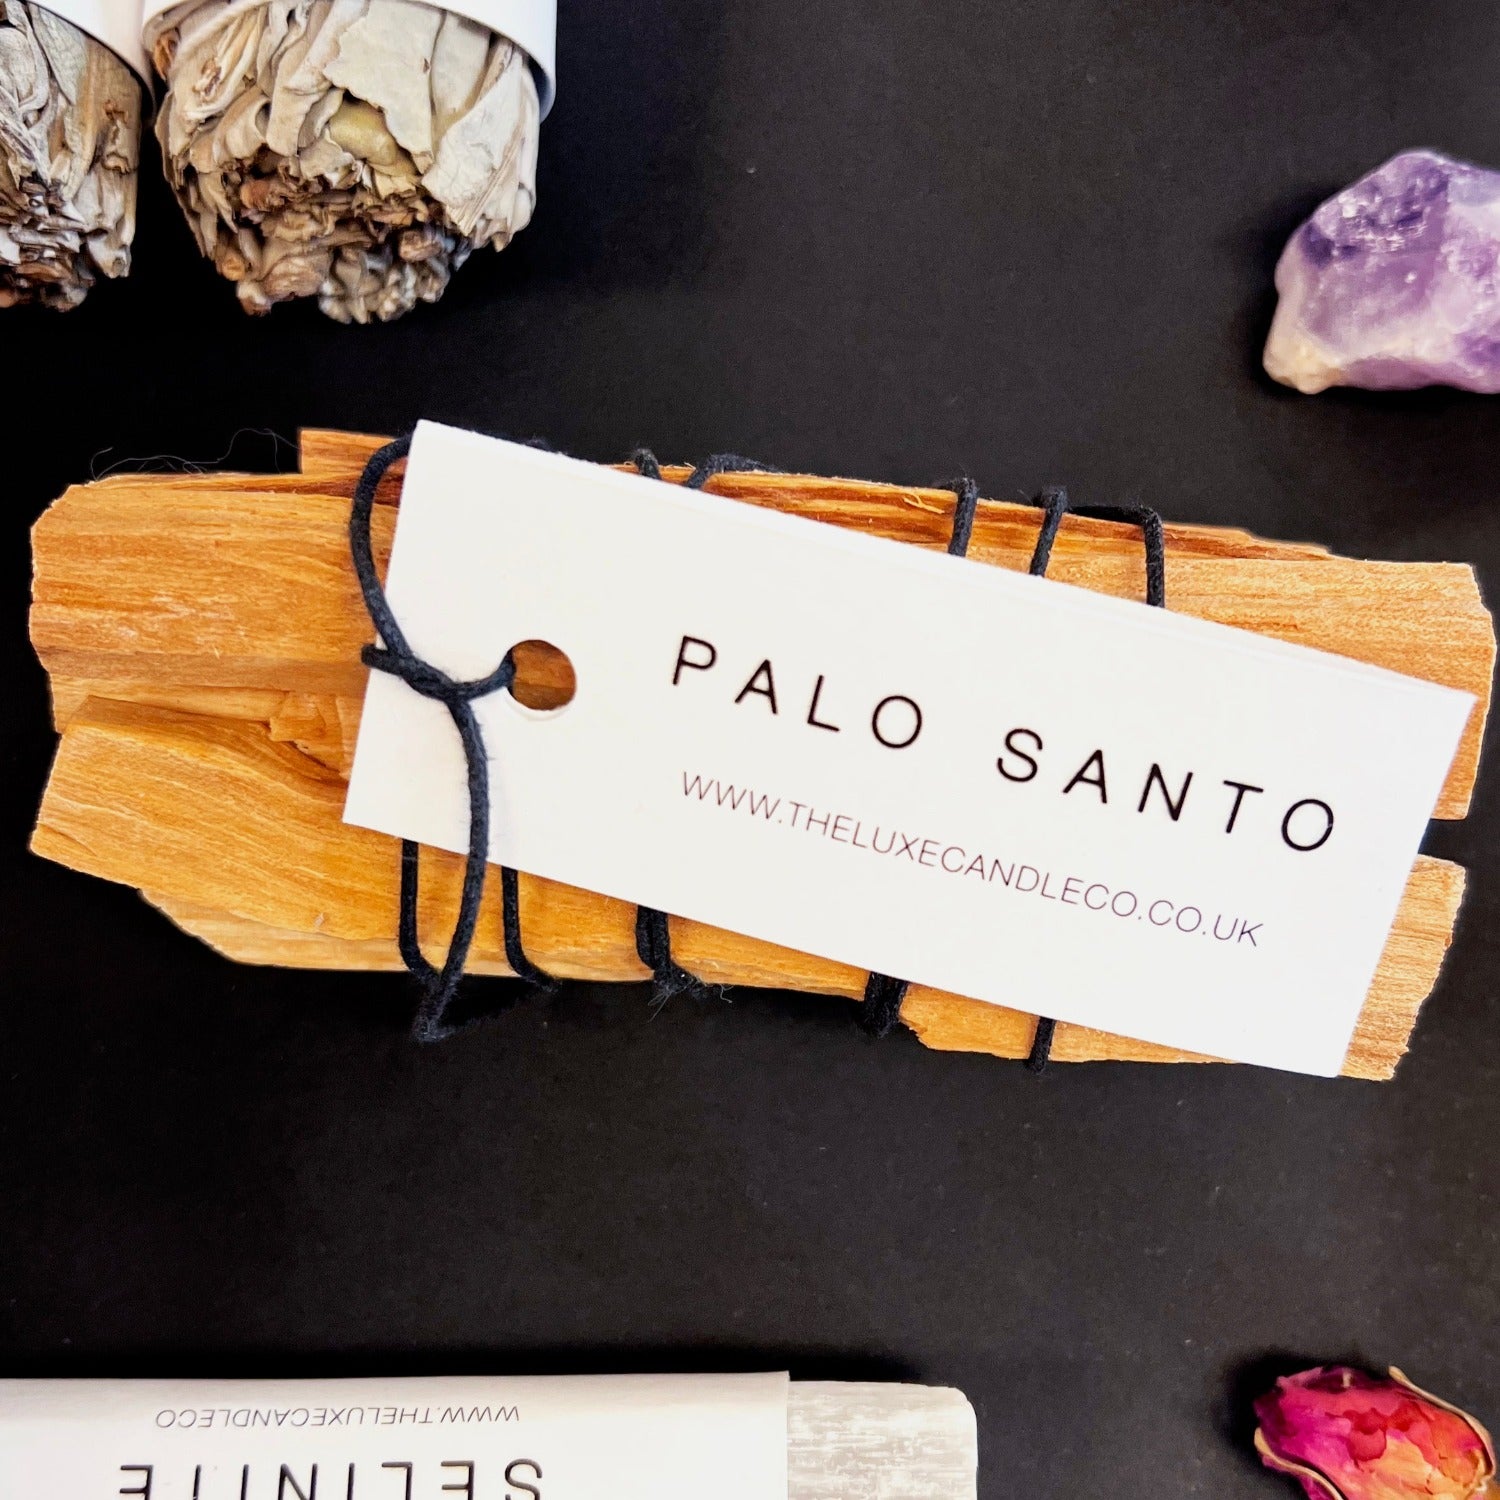 Palo santo sticks benefits - The benefits of using Holy wood by The Luxe Candle Co Wellness + Self Care Collection